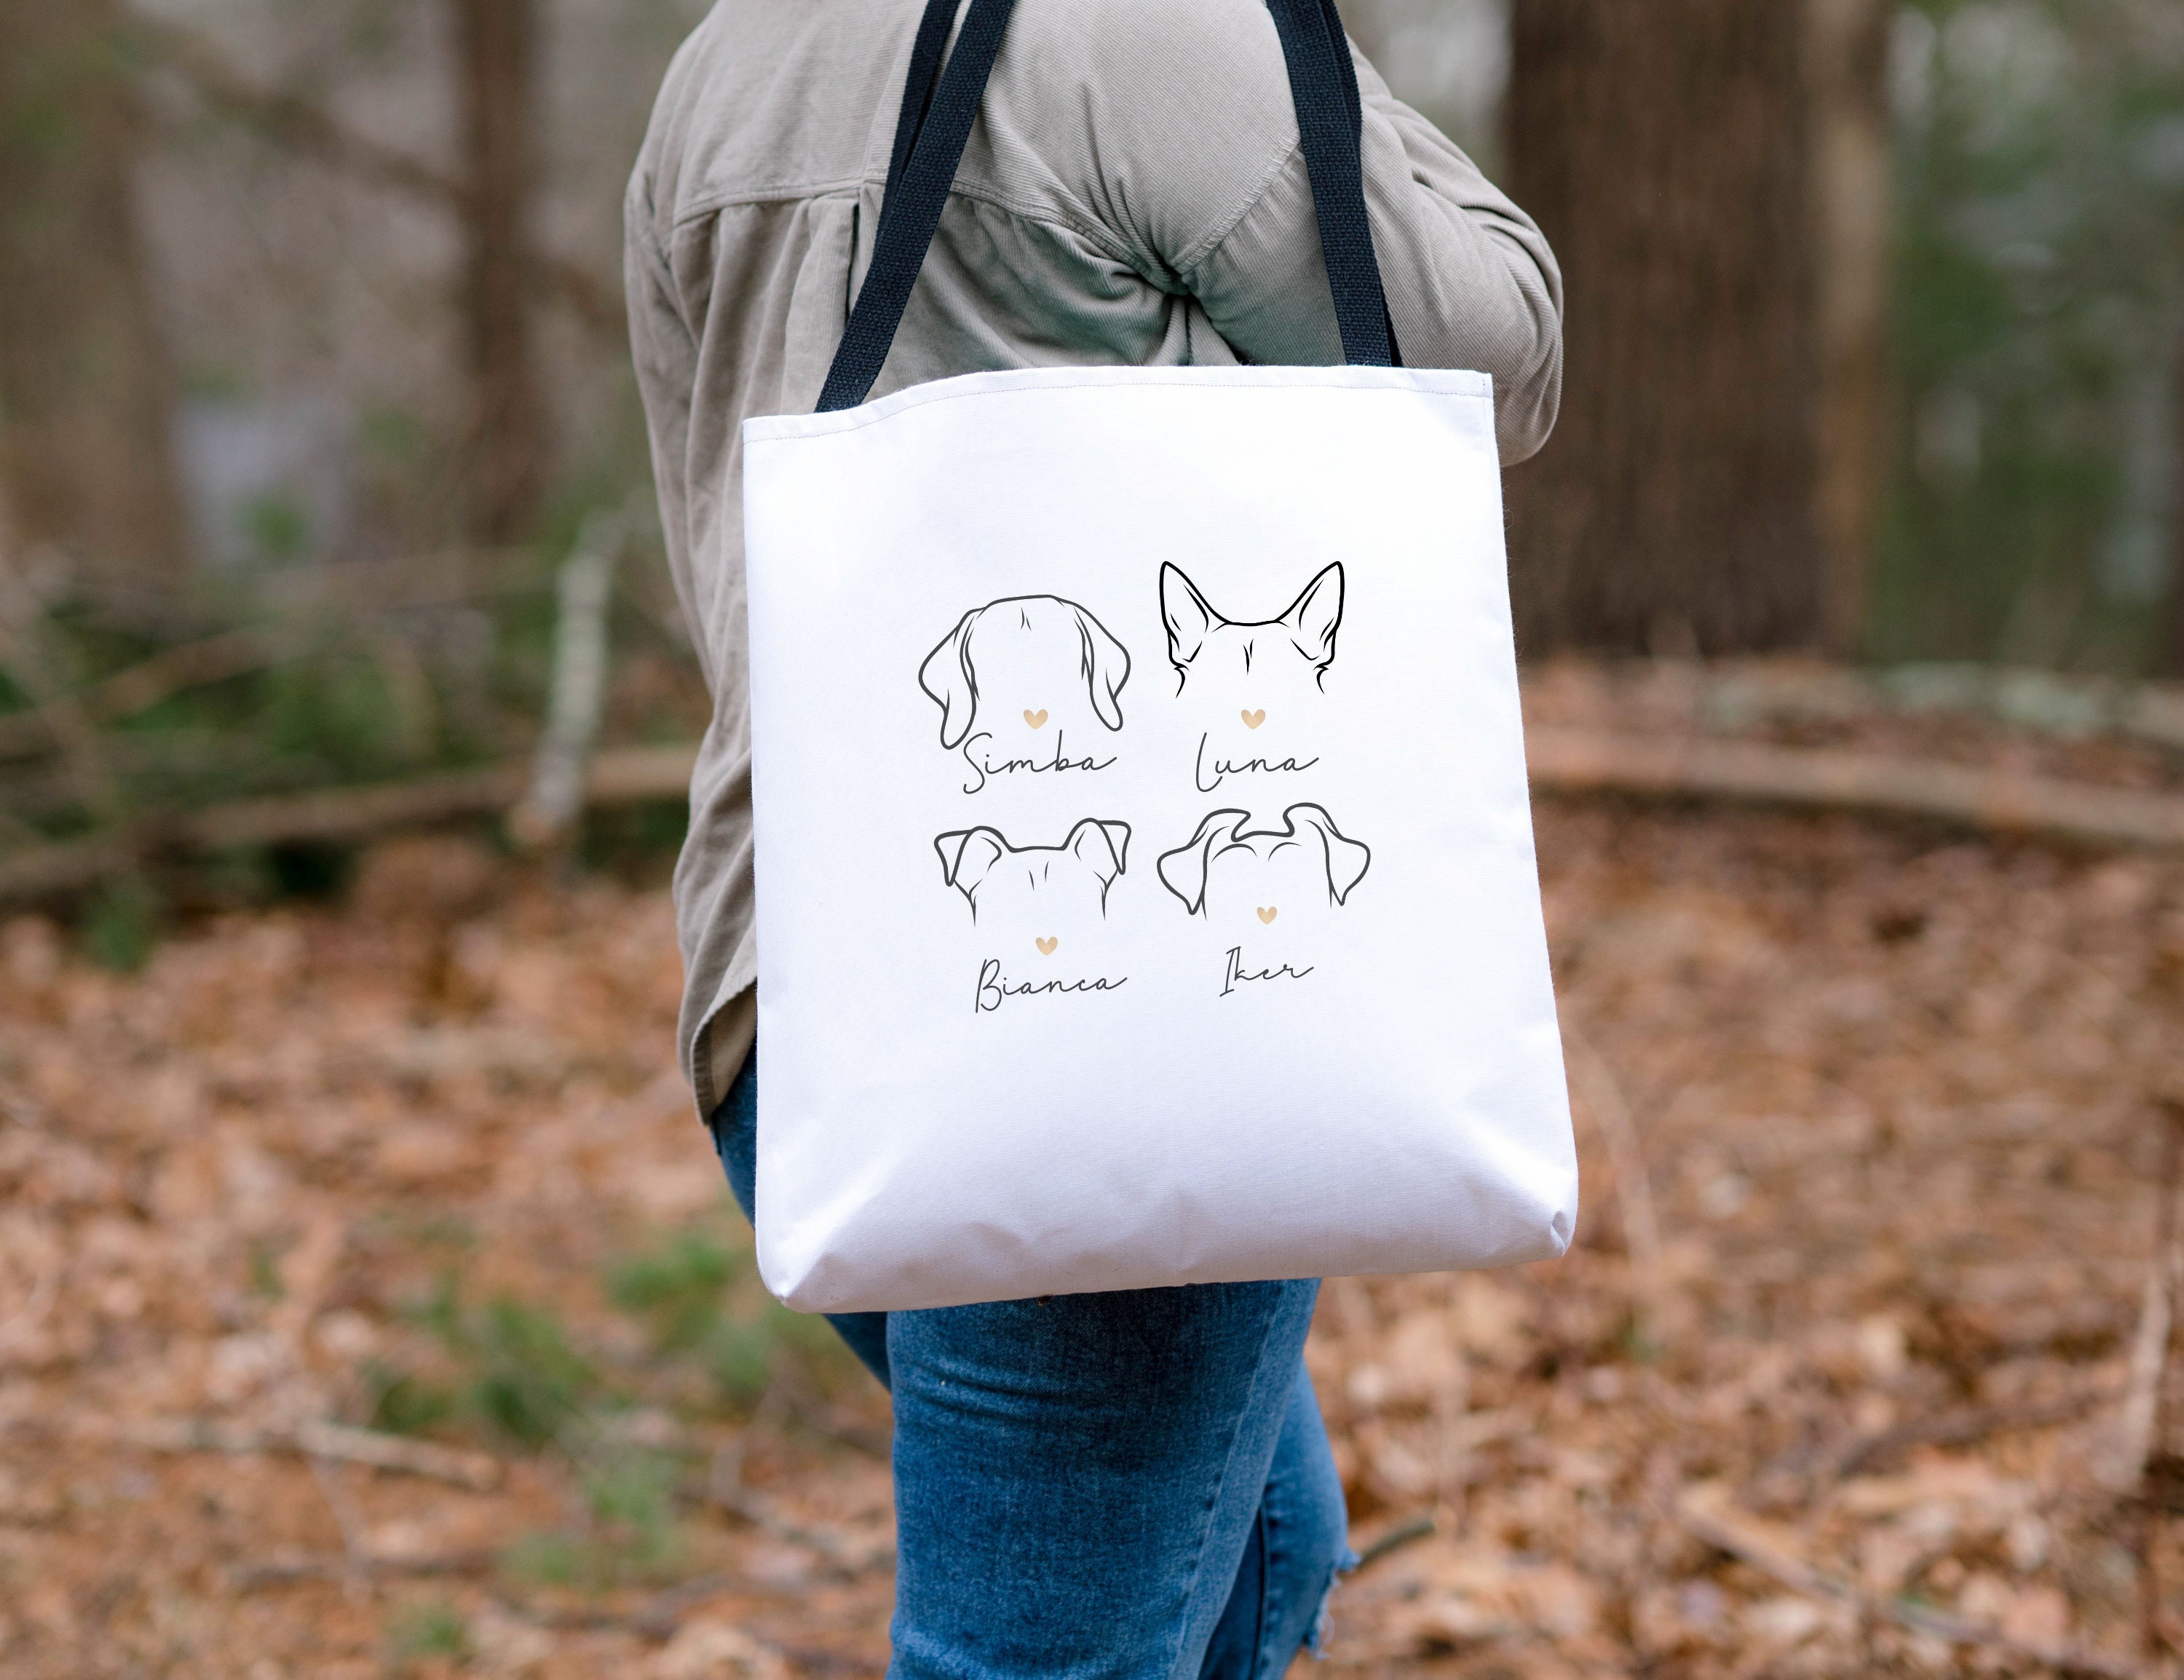 Personalized Border Collie Tote Bag Embroidered with Dog Name